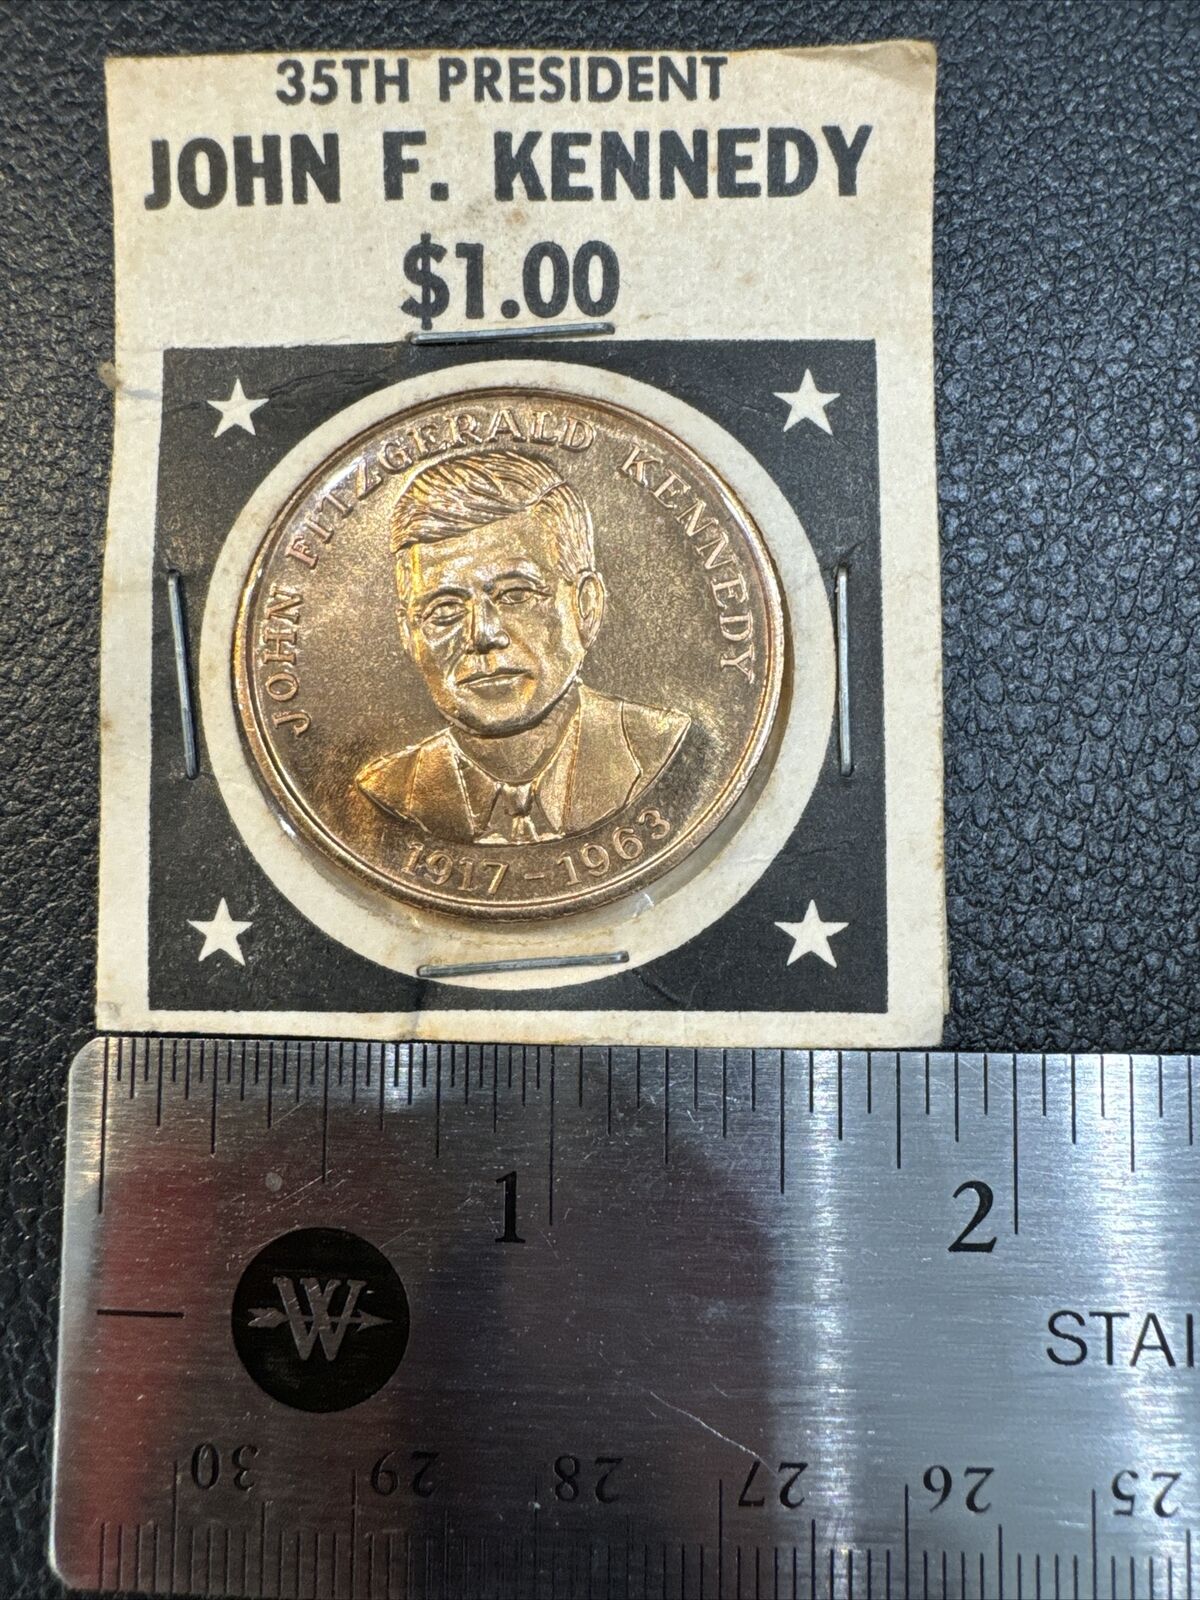 John F Kennedy 35th US President 1917-1963  $1.00 Coin. Mint. New. UNC.